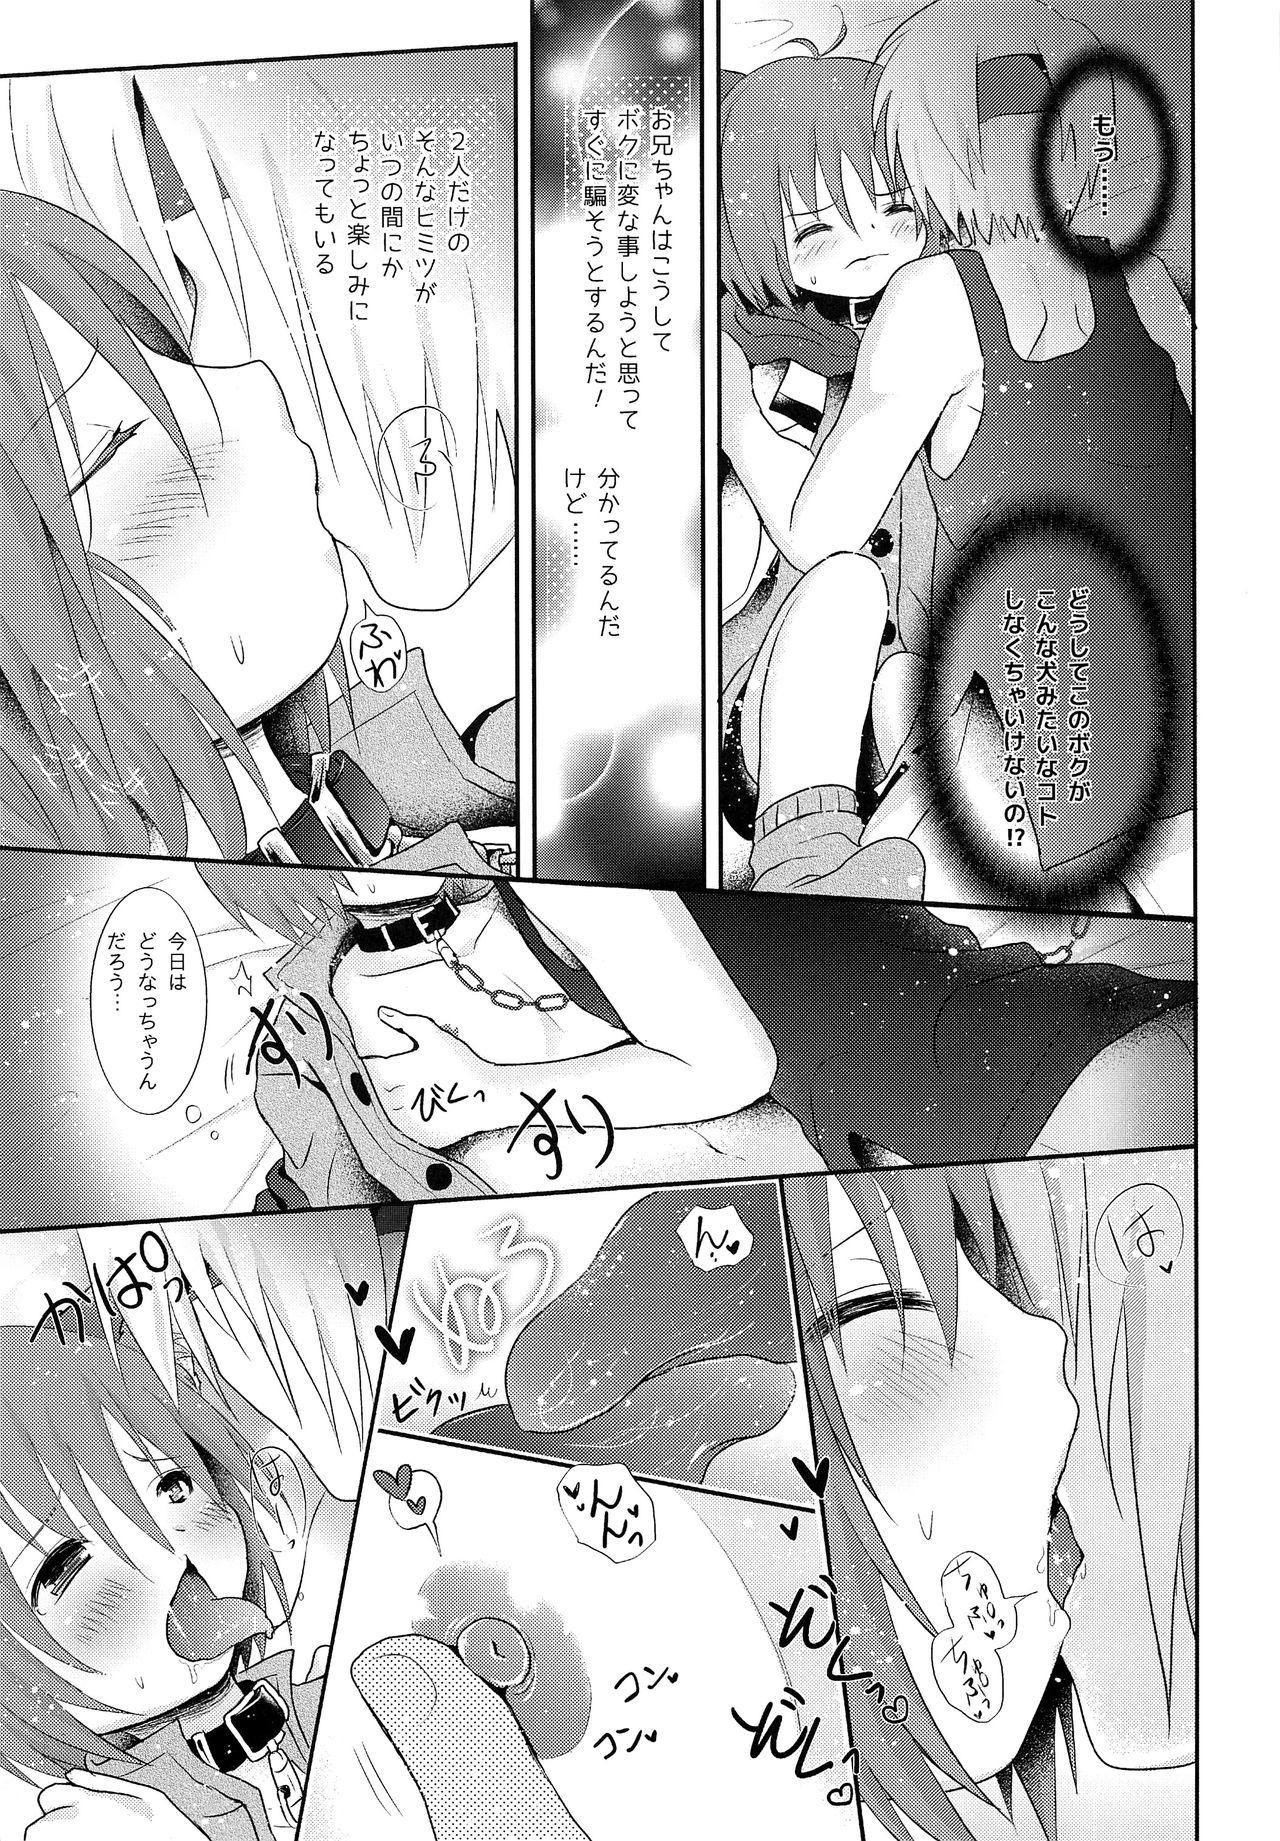 Asia instincts - Star ocean 2 Scandal - Page 4